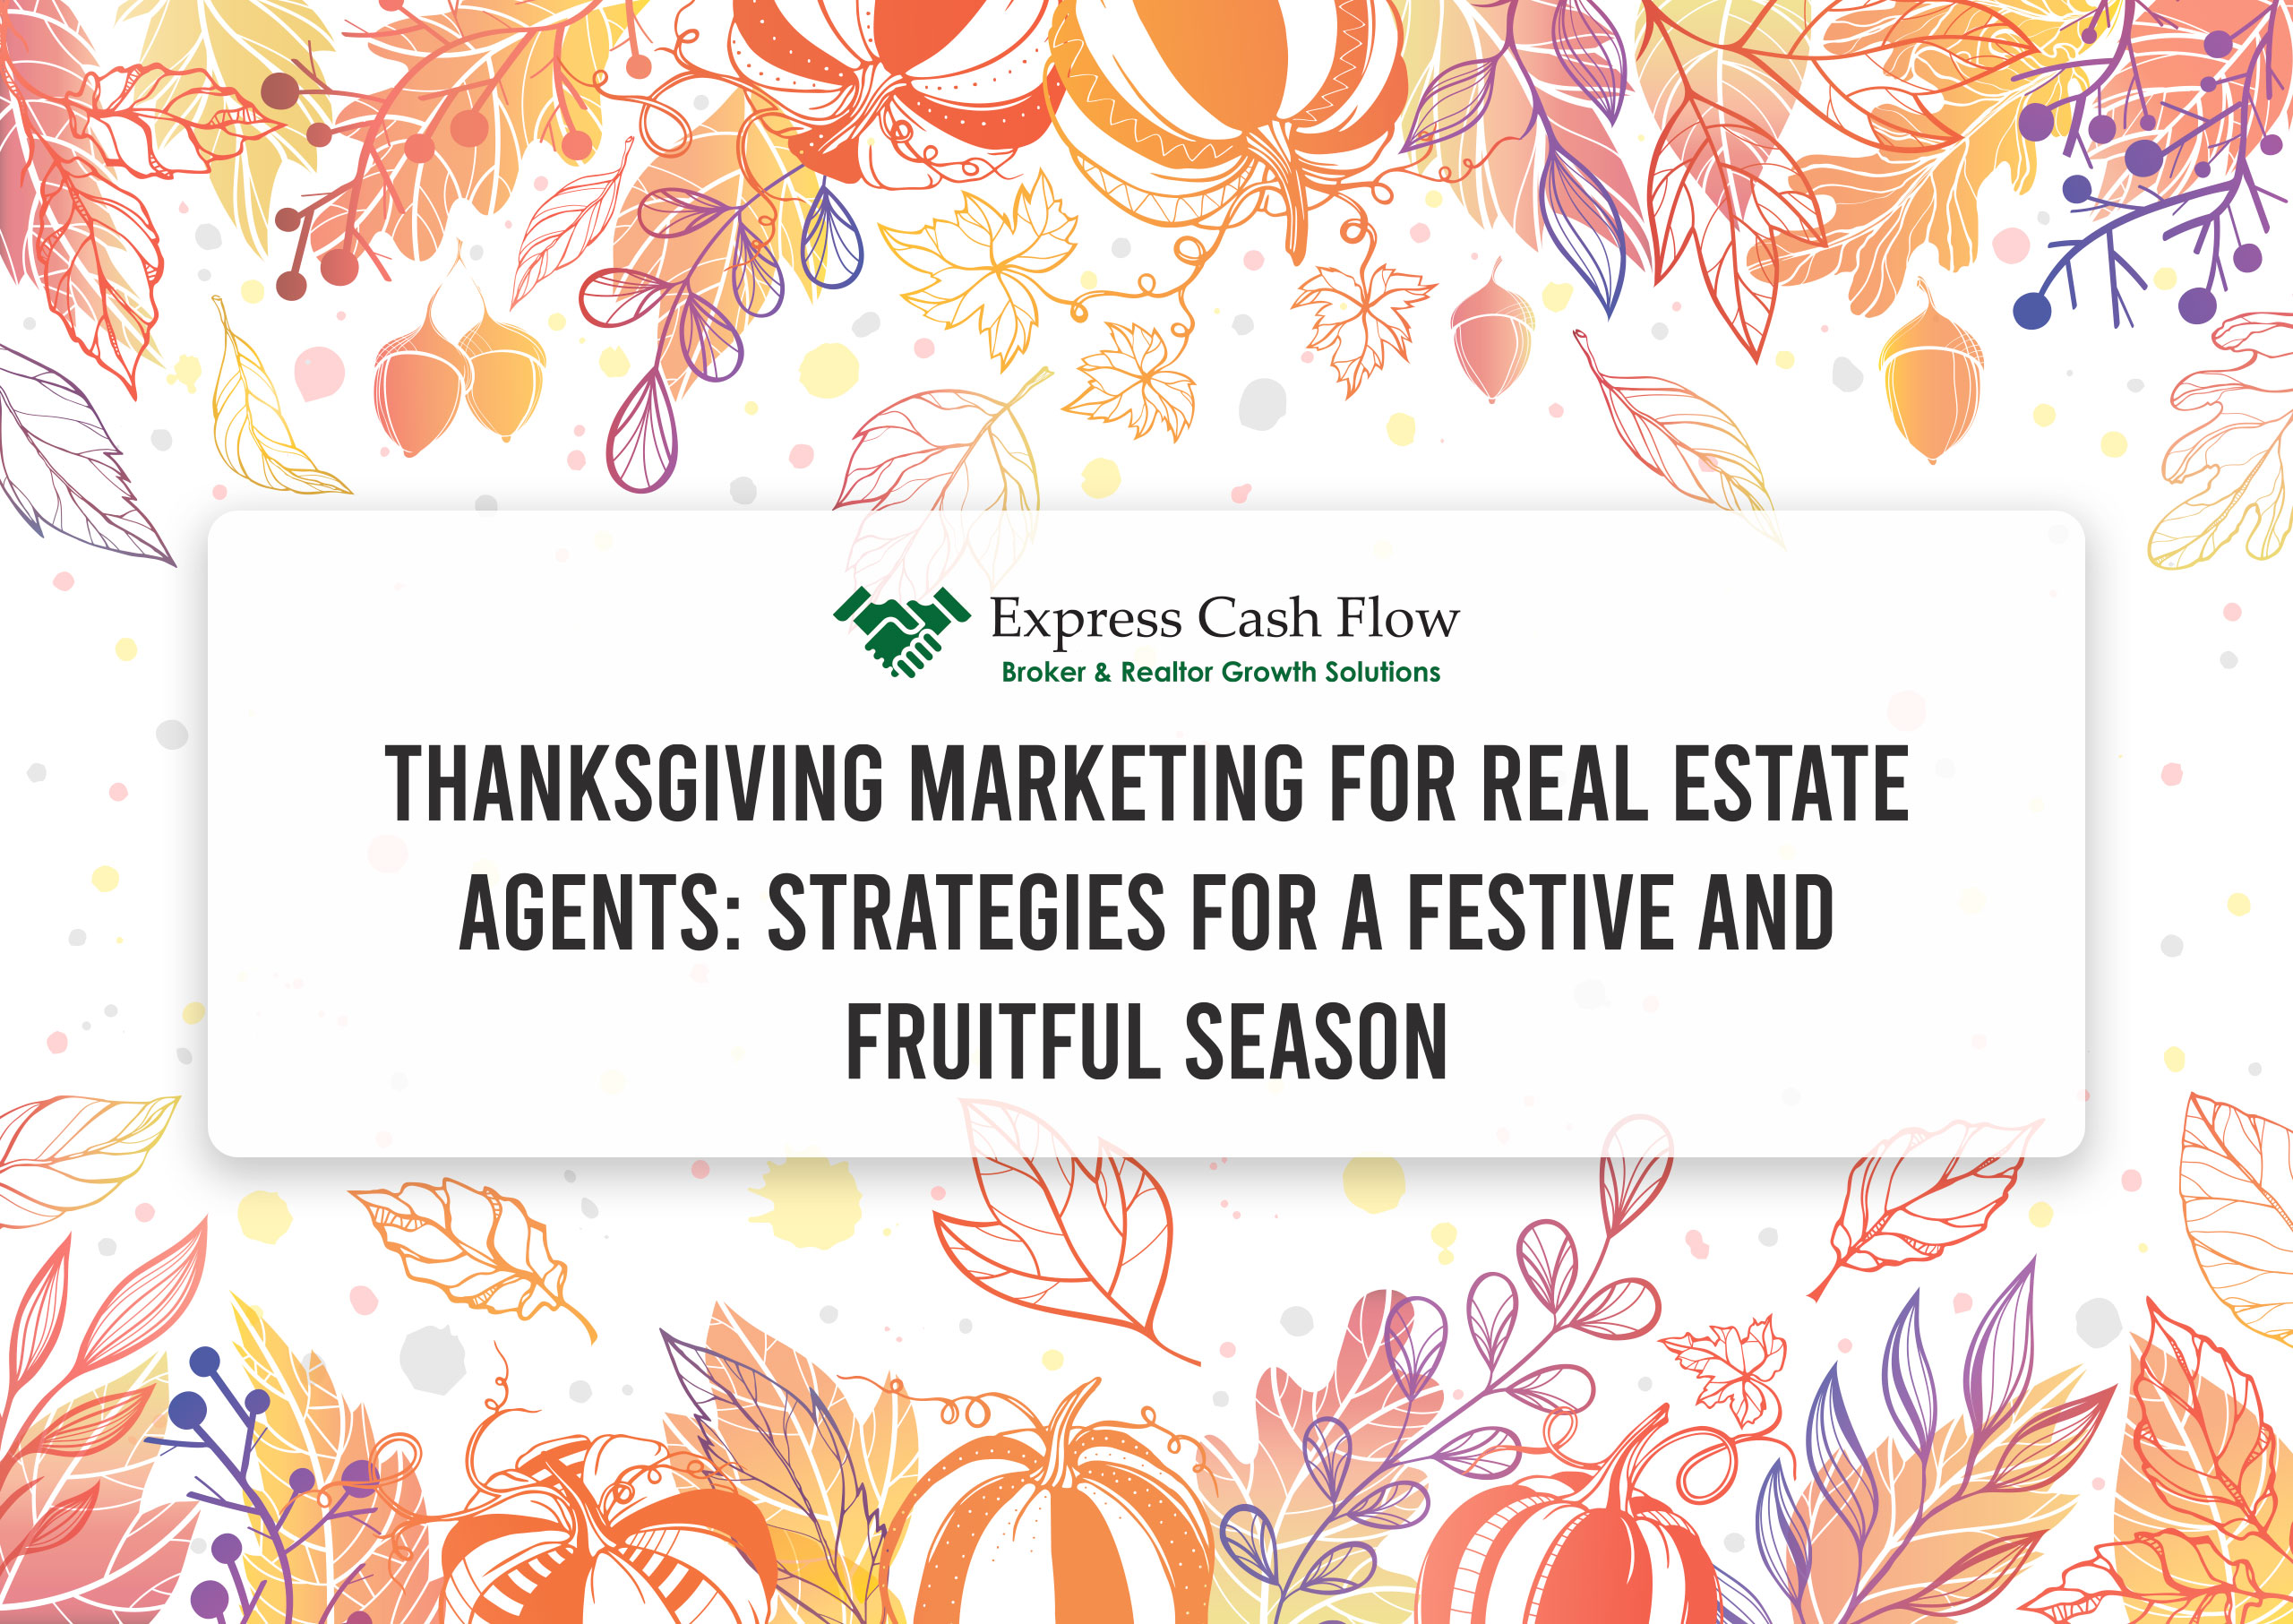 Guide to thanks giving marketing for Real Estate Agents